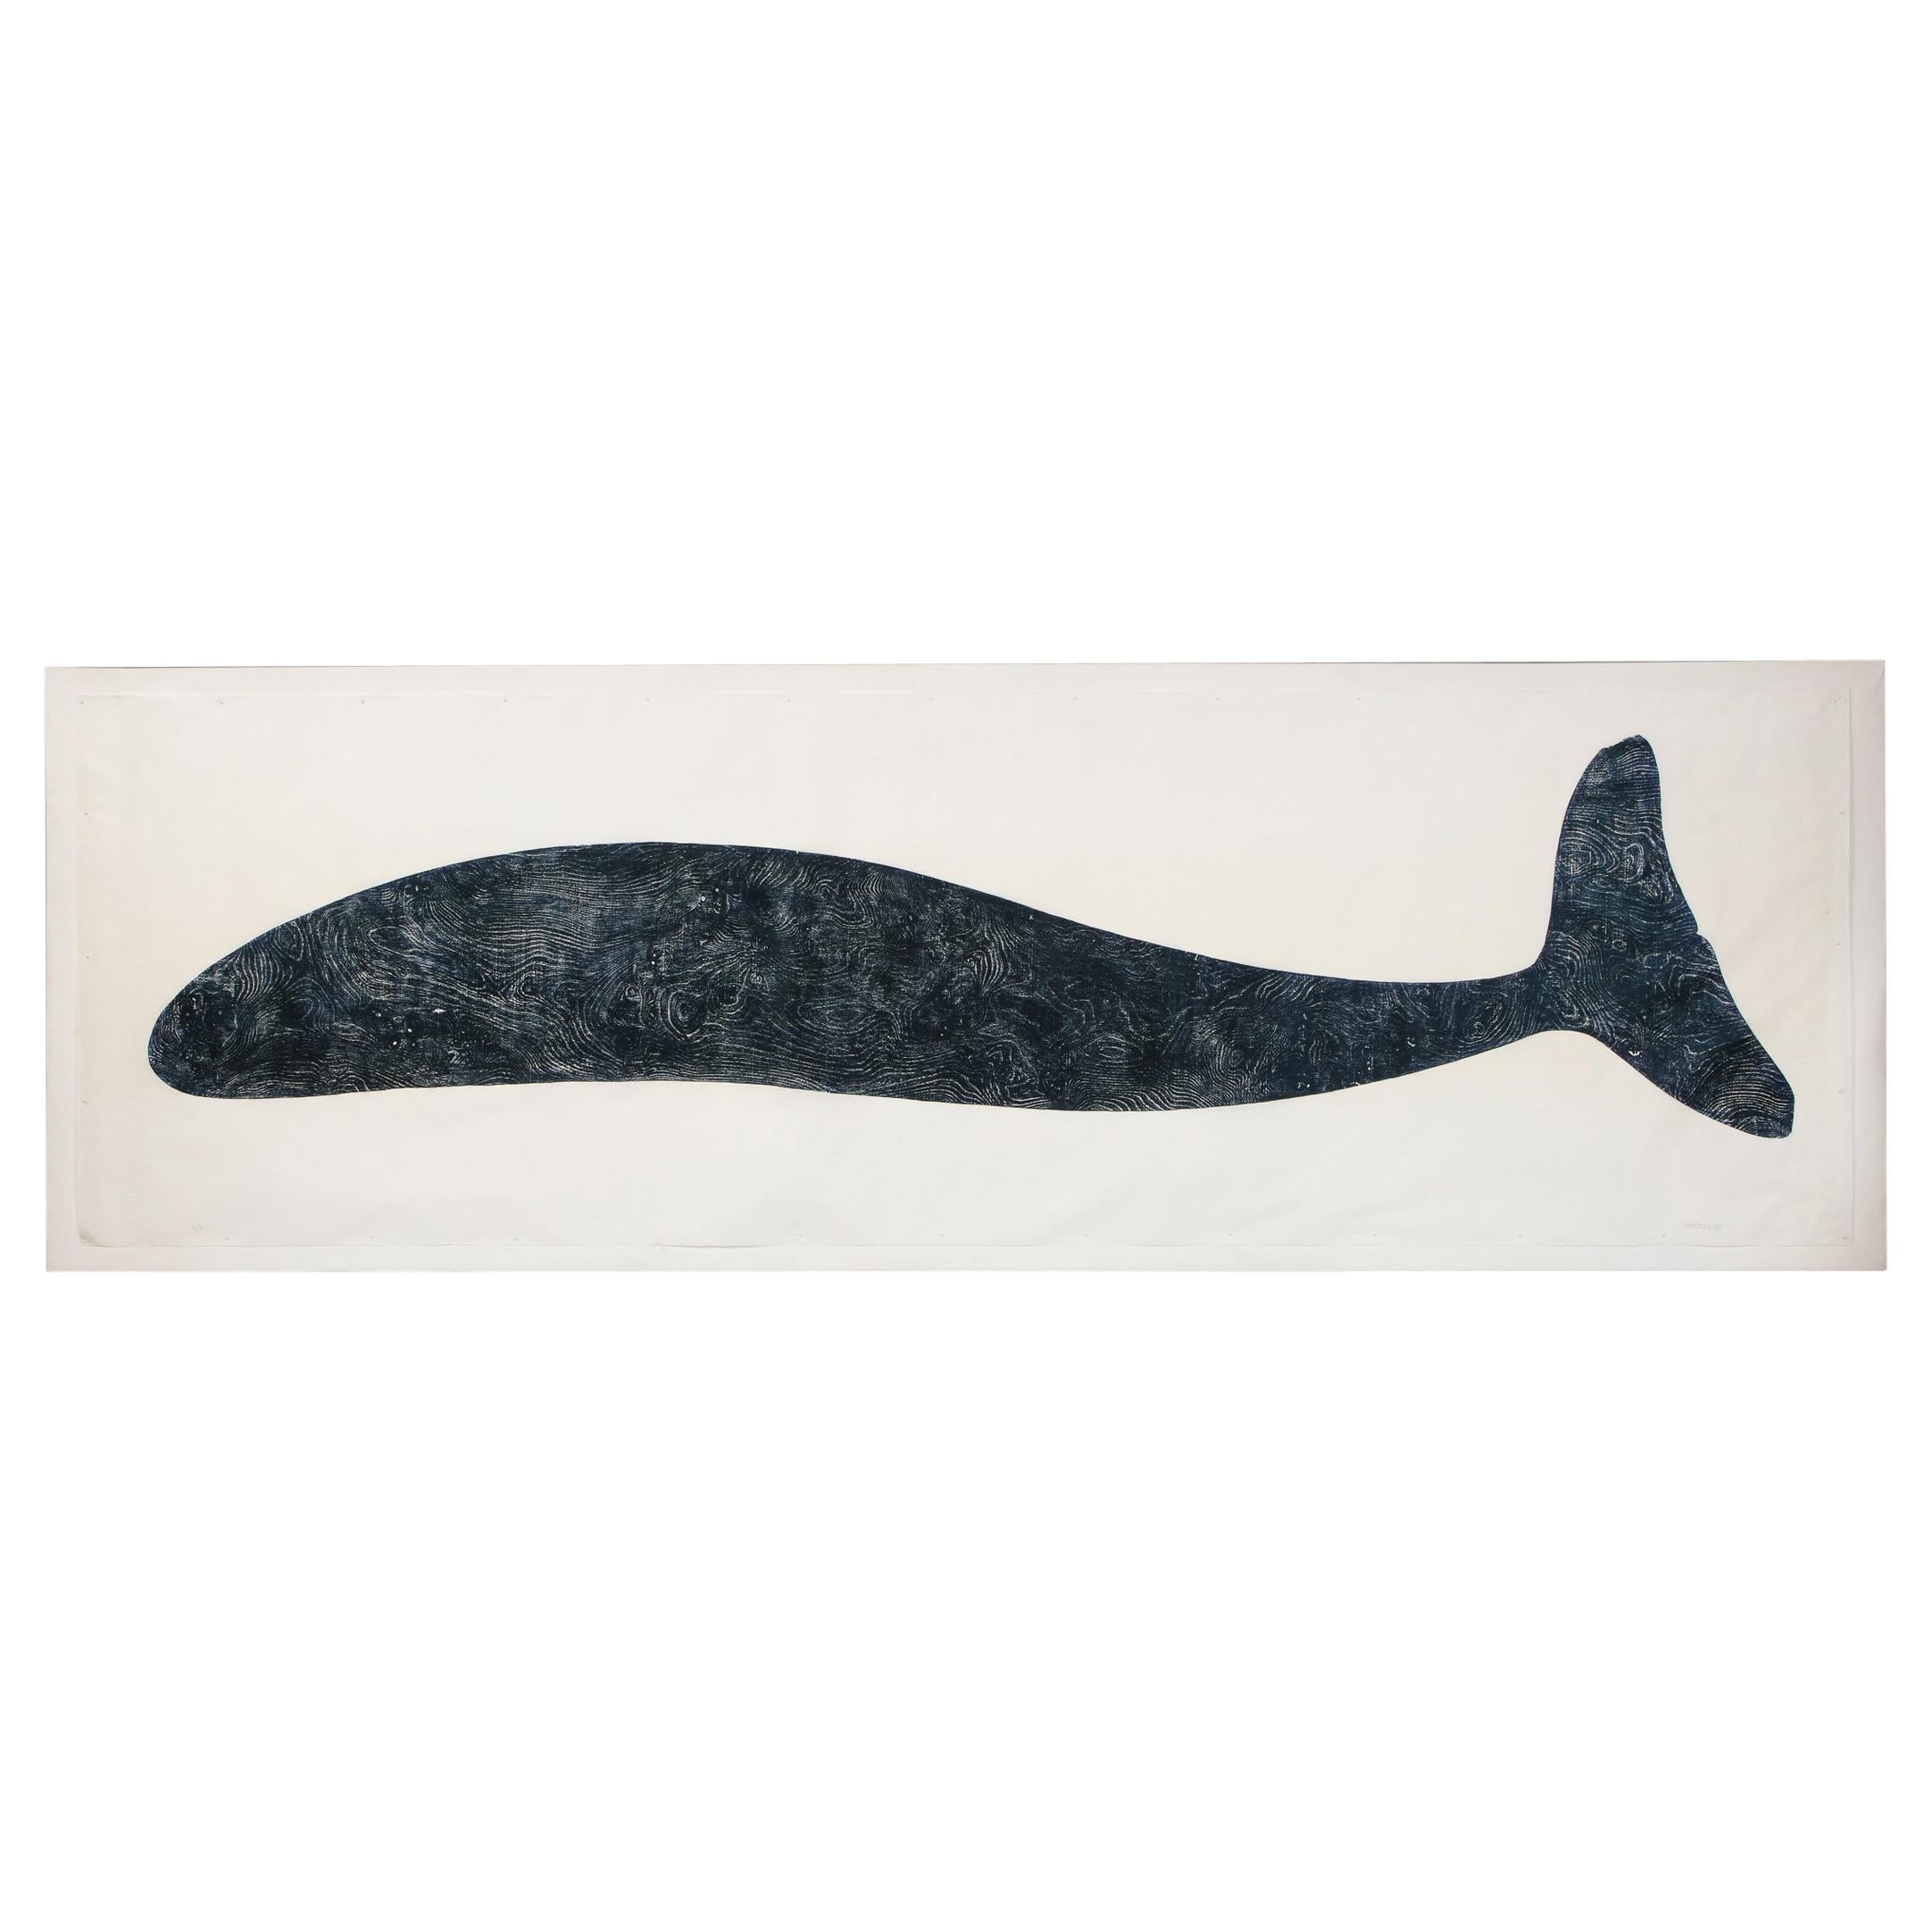 “Right Whale ‘Facing Left’” by Julian Meredith